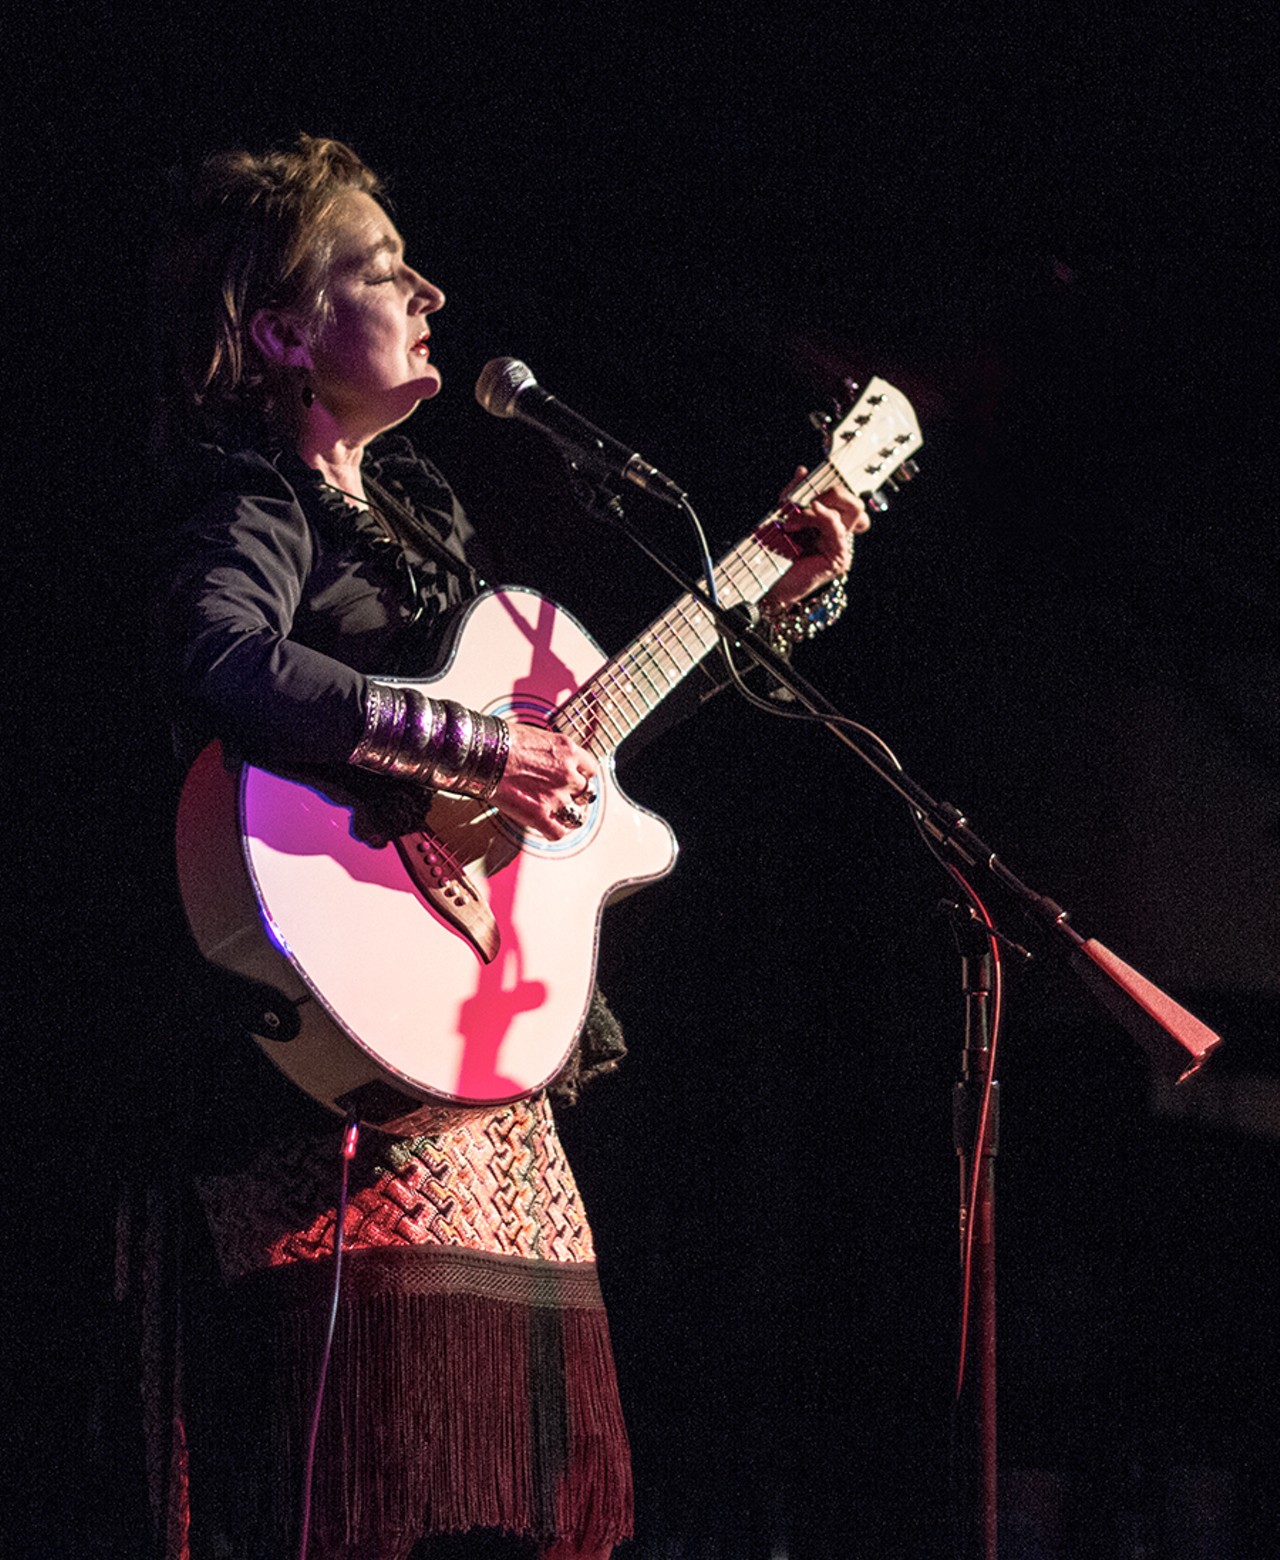 Jane Siberry at the ARK